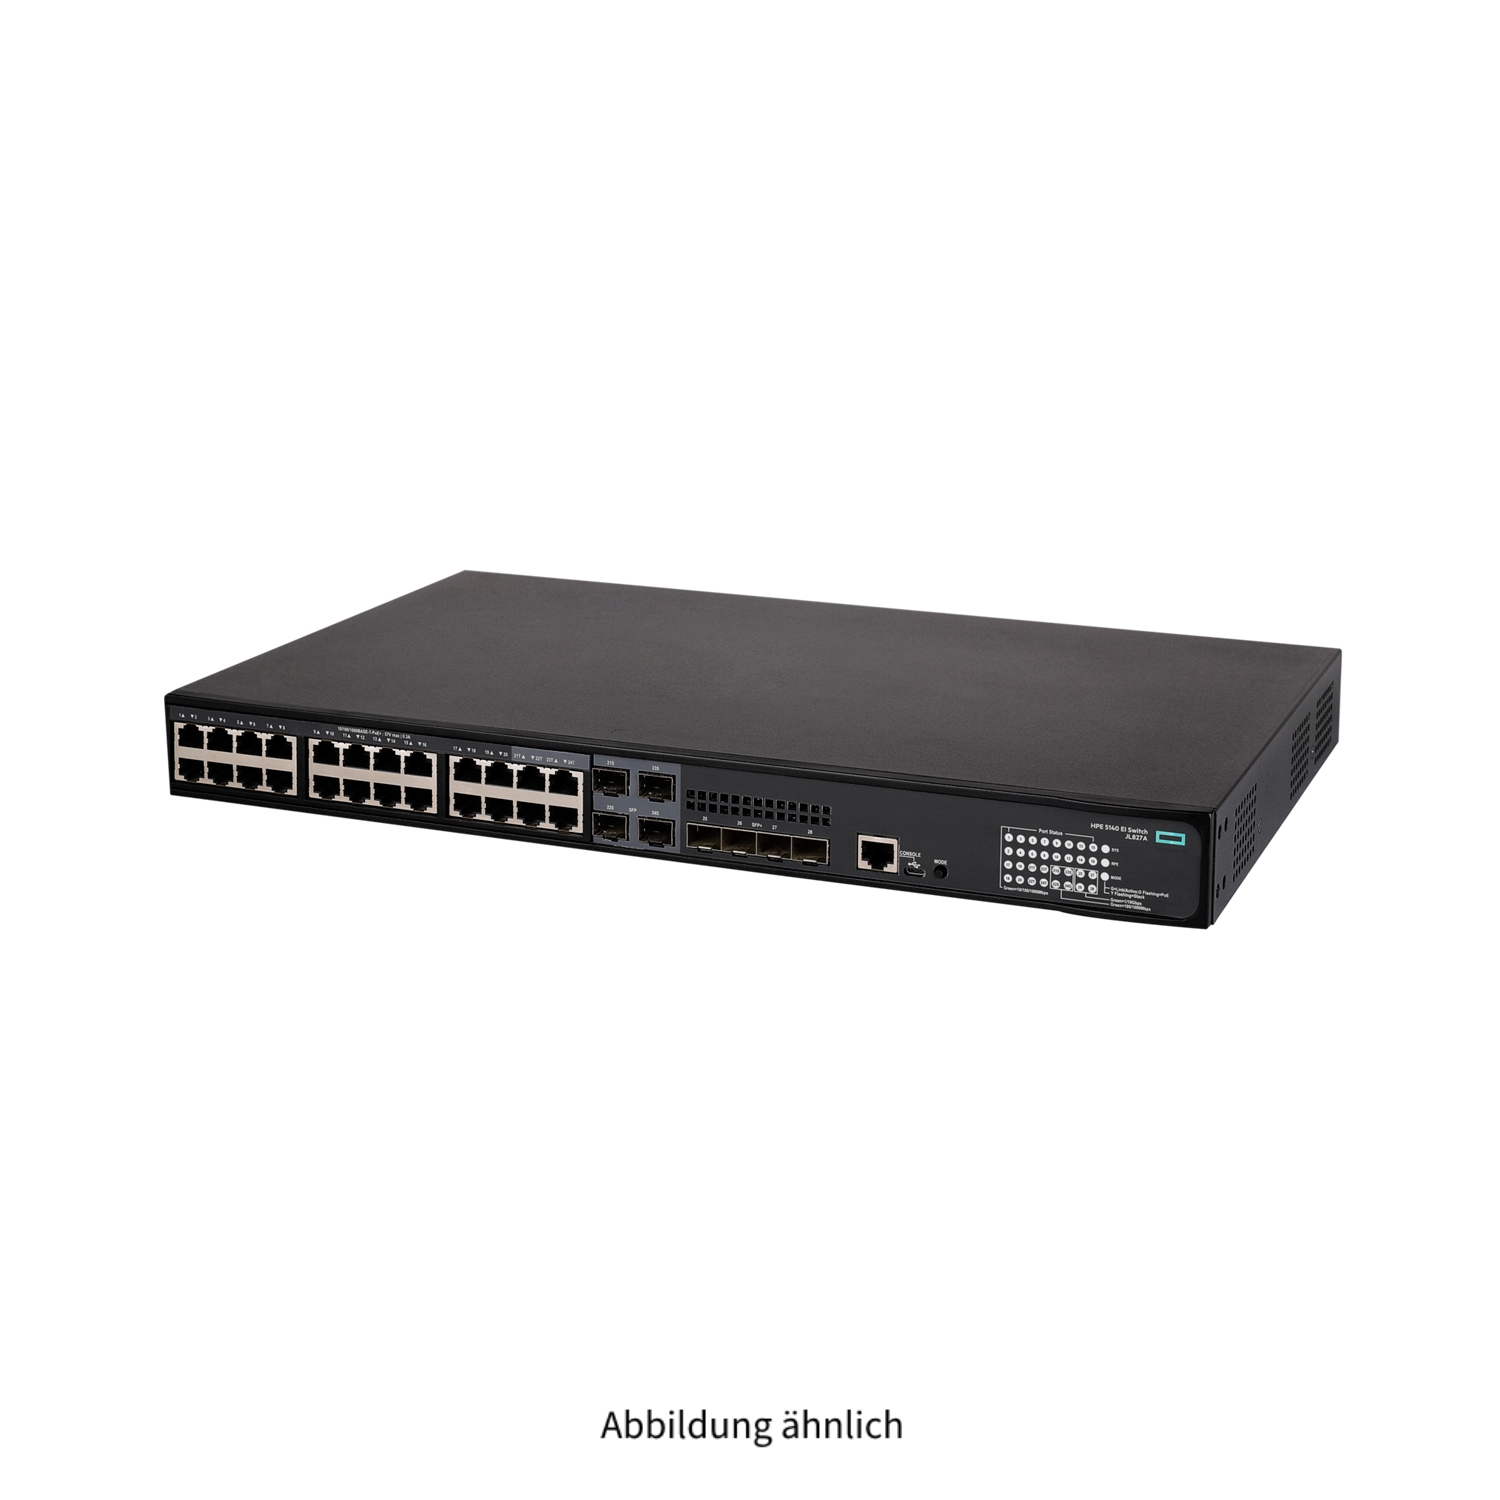 HPE FlexNetwork 5140-24G-SFP+ 24x 1GbE PoE+ 4x Shared SFP 1GbE 4x SFP+ 10GbE Managed Switch JL827A JL827-61001